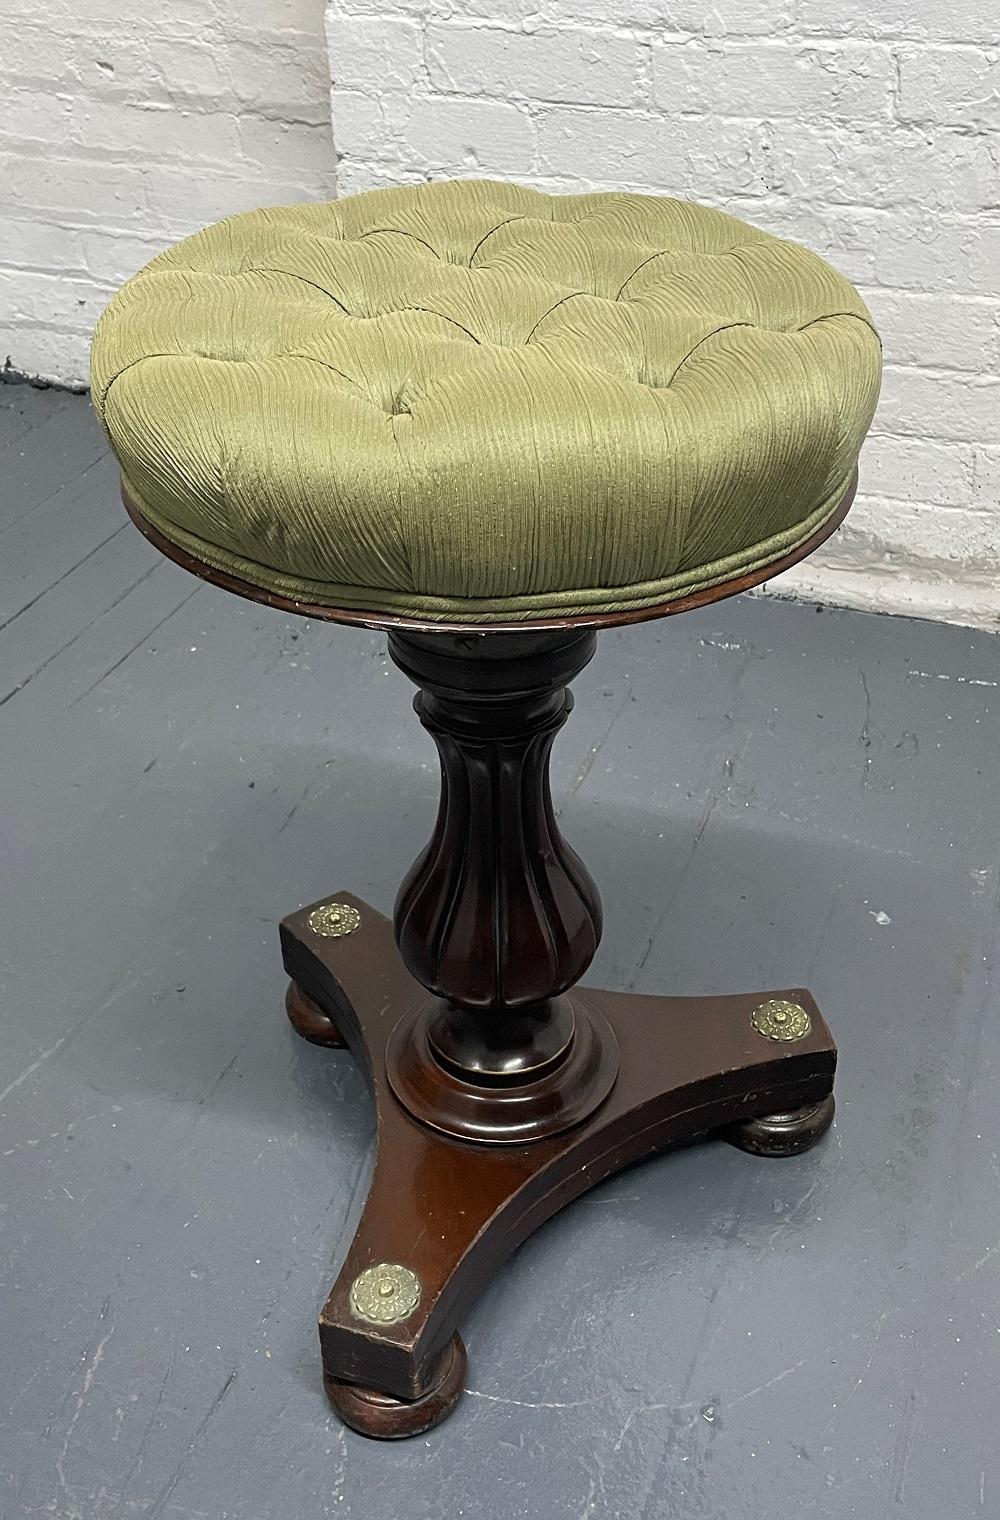 Antique adjustable mahogany and brass stool. The stool has a tufted seat with brass accents to the frame.